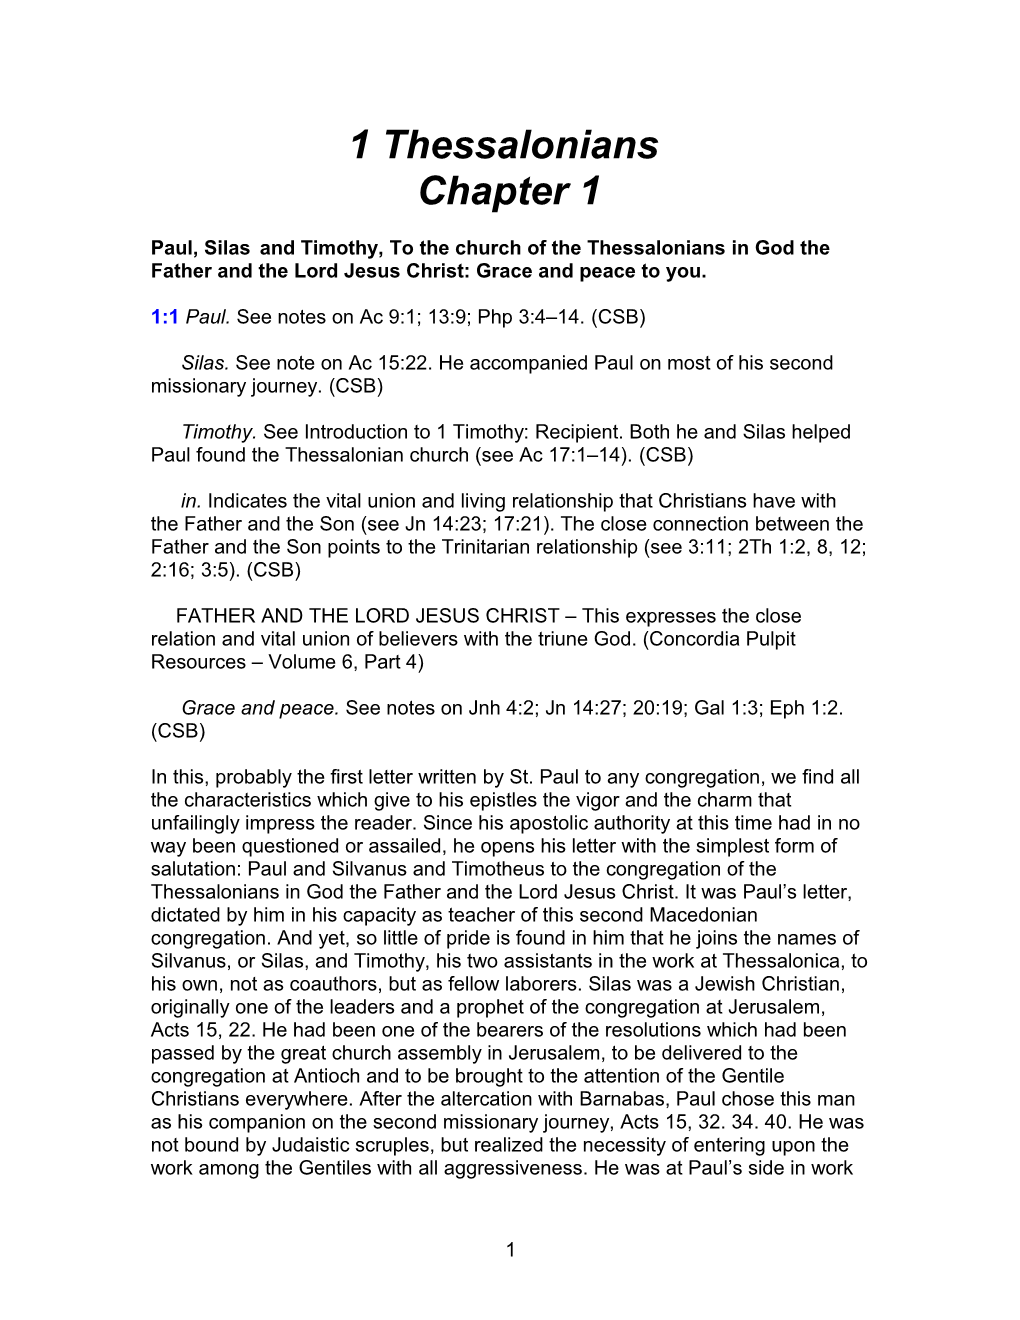 1:1 Paul. See Notes on Ac 9:1; 13:9; Php 3:4 14. (CSB)